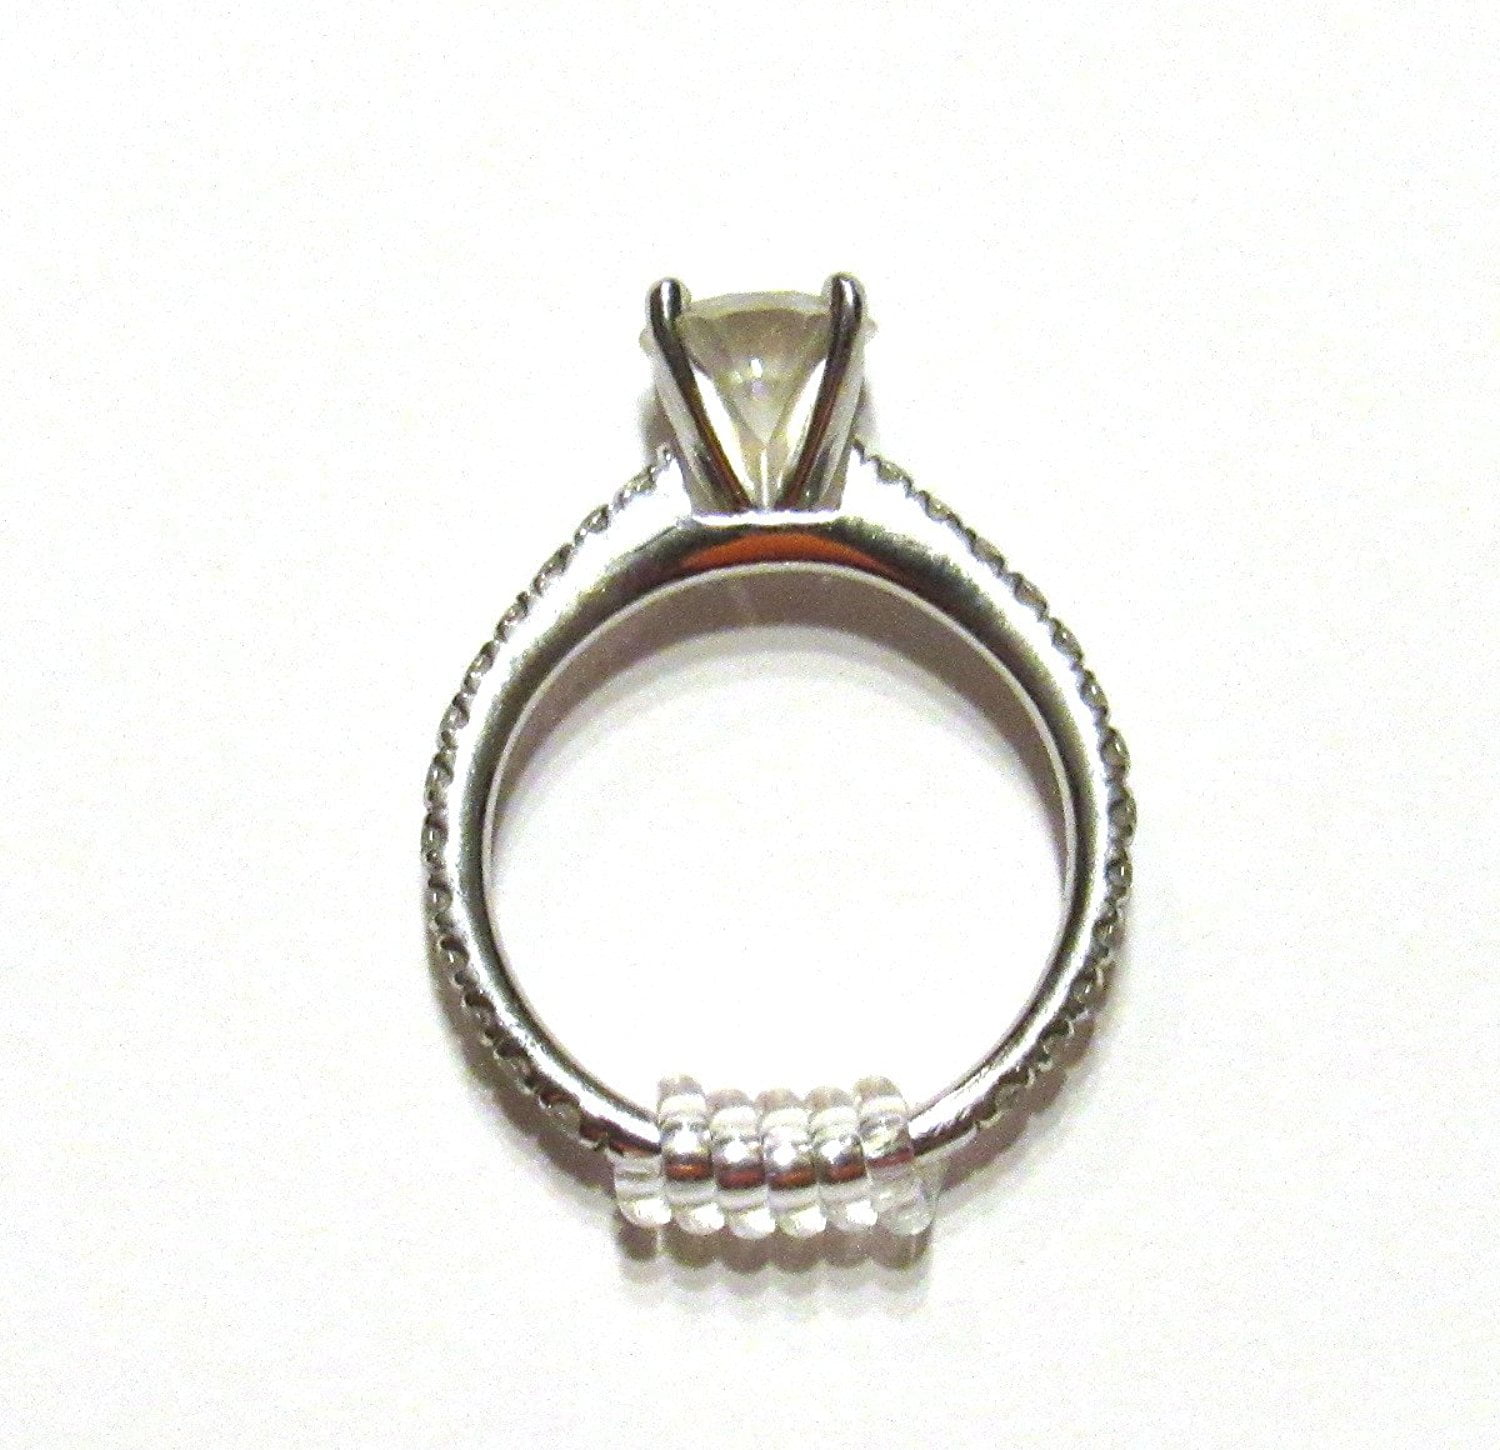 Ring Snuggie Ring Size Adjuster (Set of 4 sizes), Shop Today. Get it  Tomorrow!